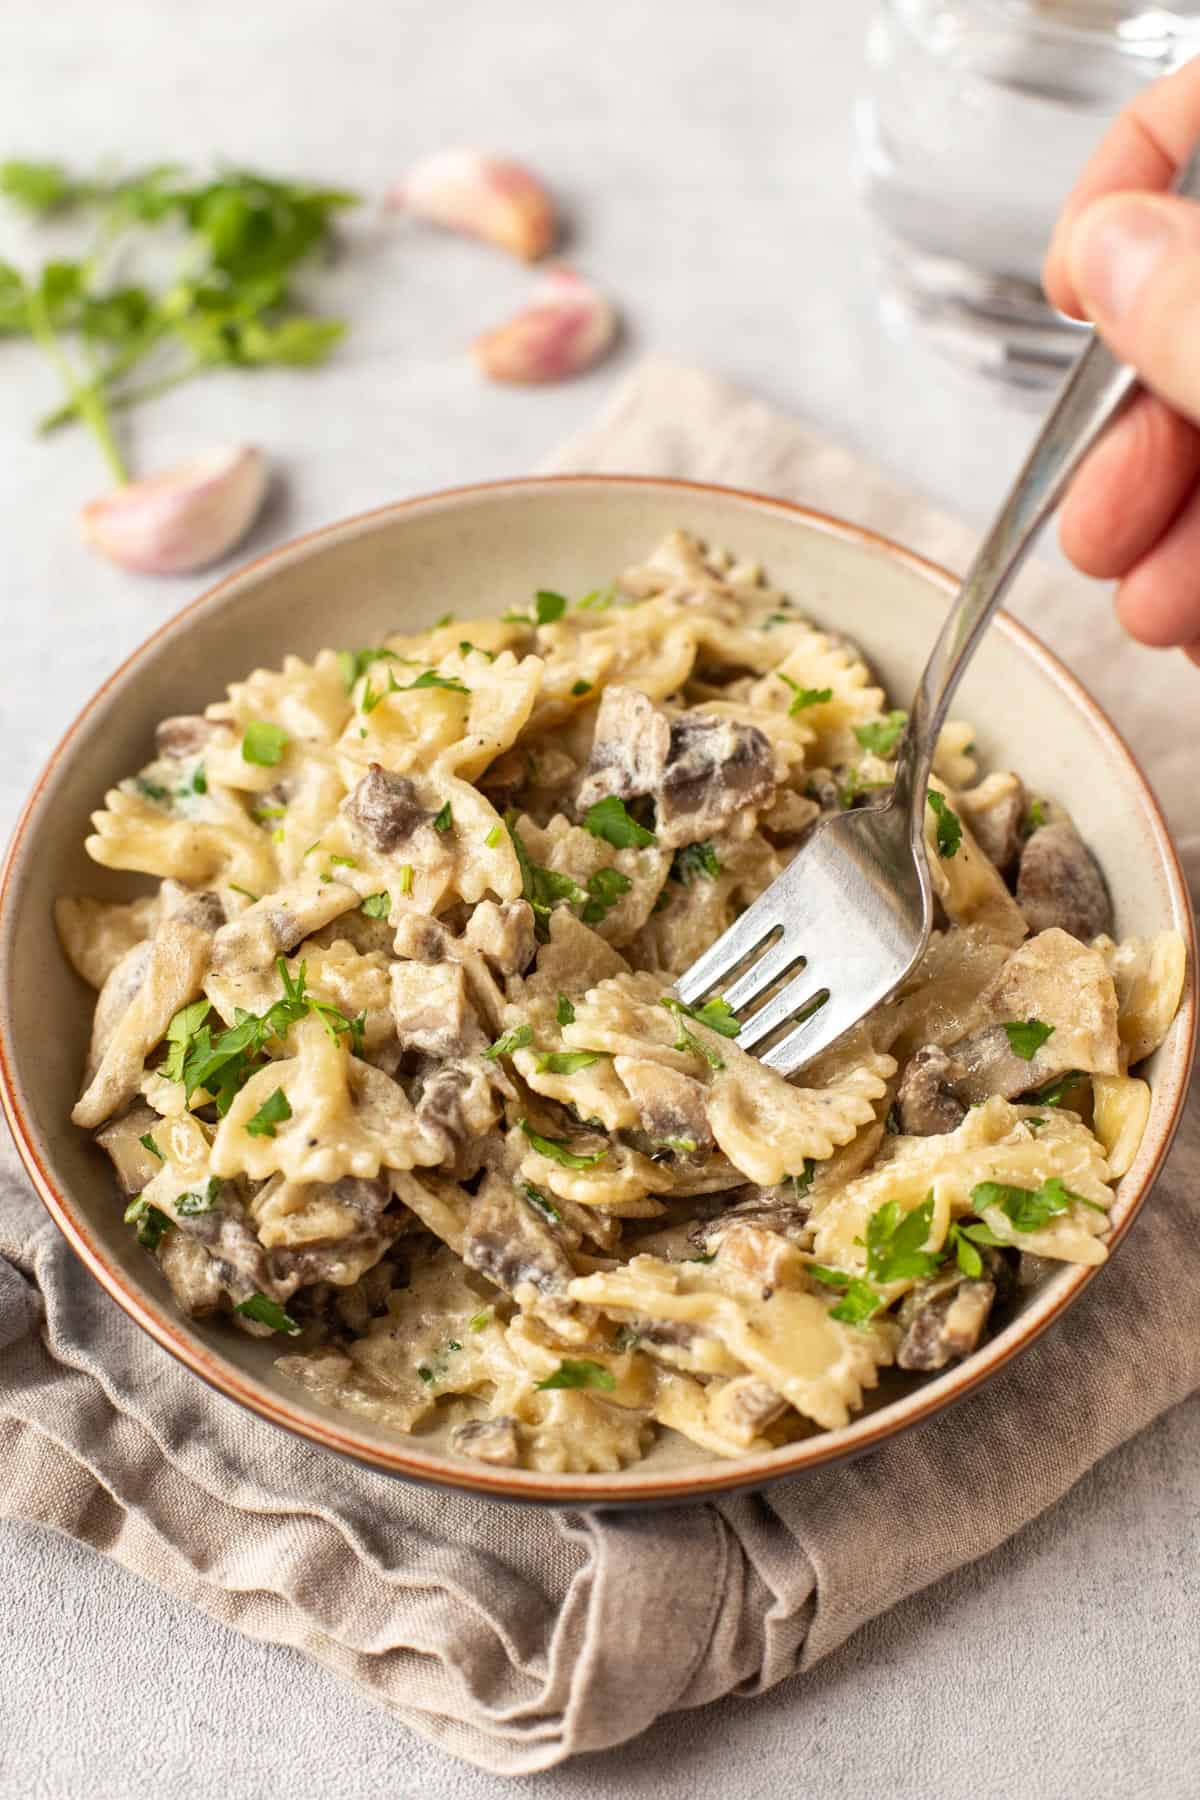 A fork taking a scoop from a bowl of pasta in creamy mushroom and white wine sauce.